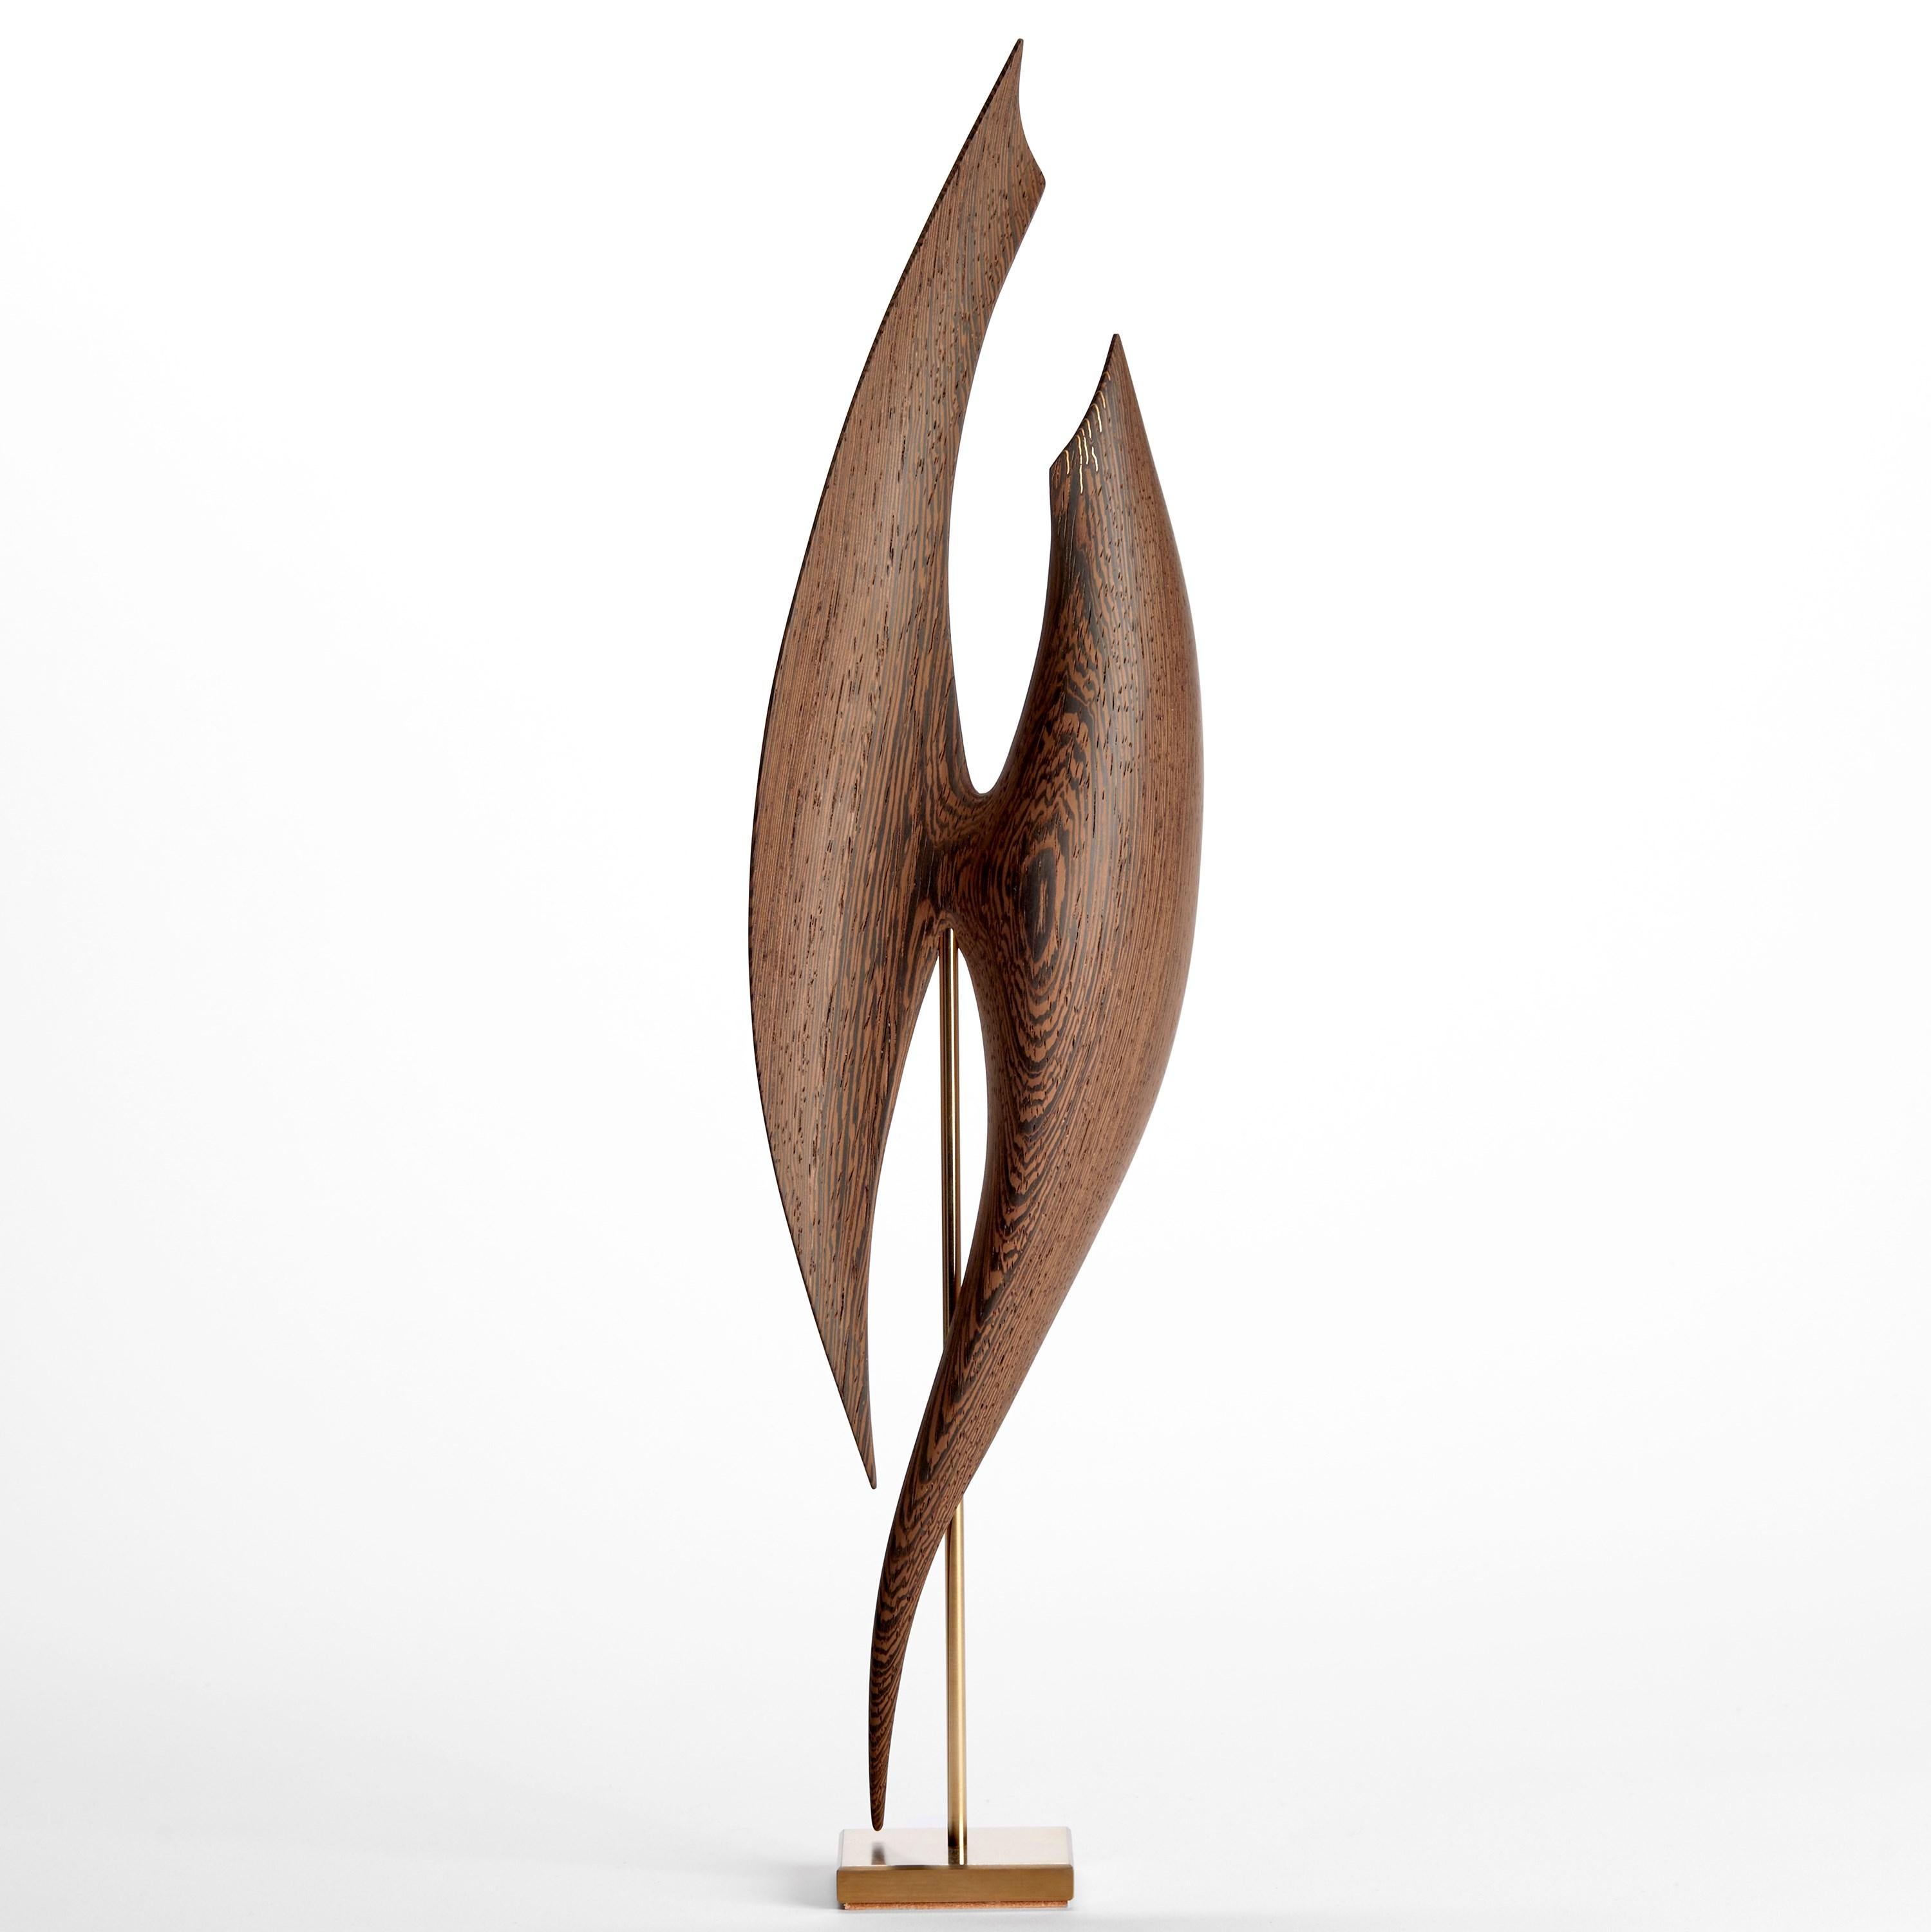 'Flow Petit No 19' is a unique artwork by the Danish artists, Egeværk. It is created from Wengé sourced from Africa - Congo and Cameroon - (wood, FSC* certified) with an inlay of 24ct fine gold and gold plated stainless steel foot. Signed on the